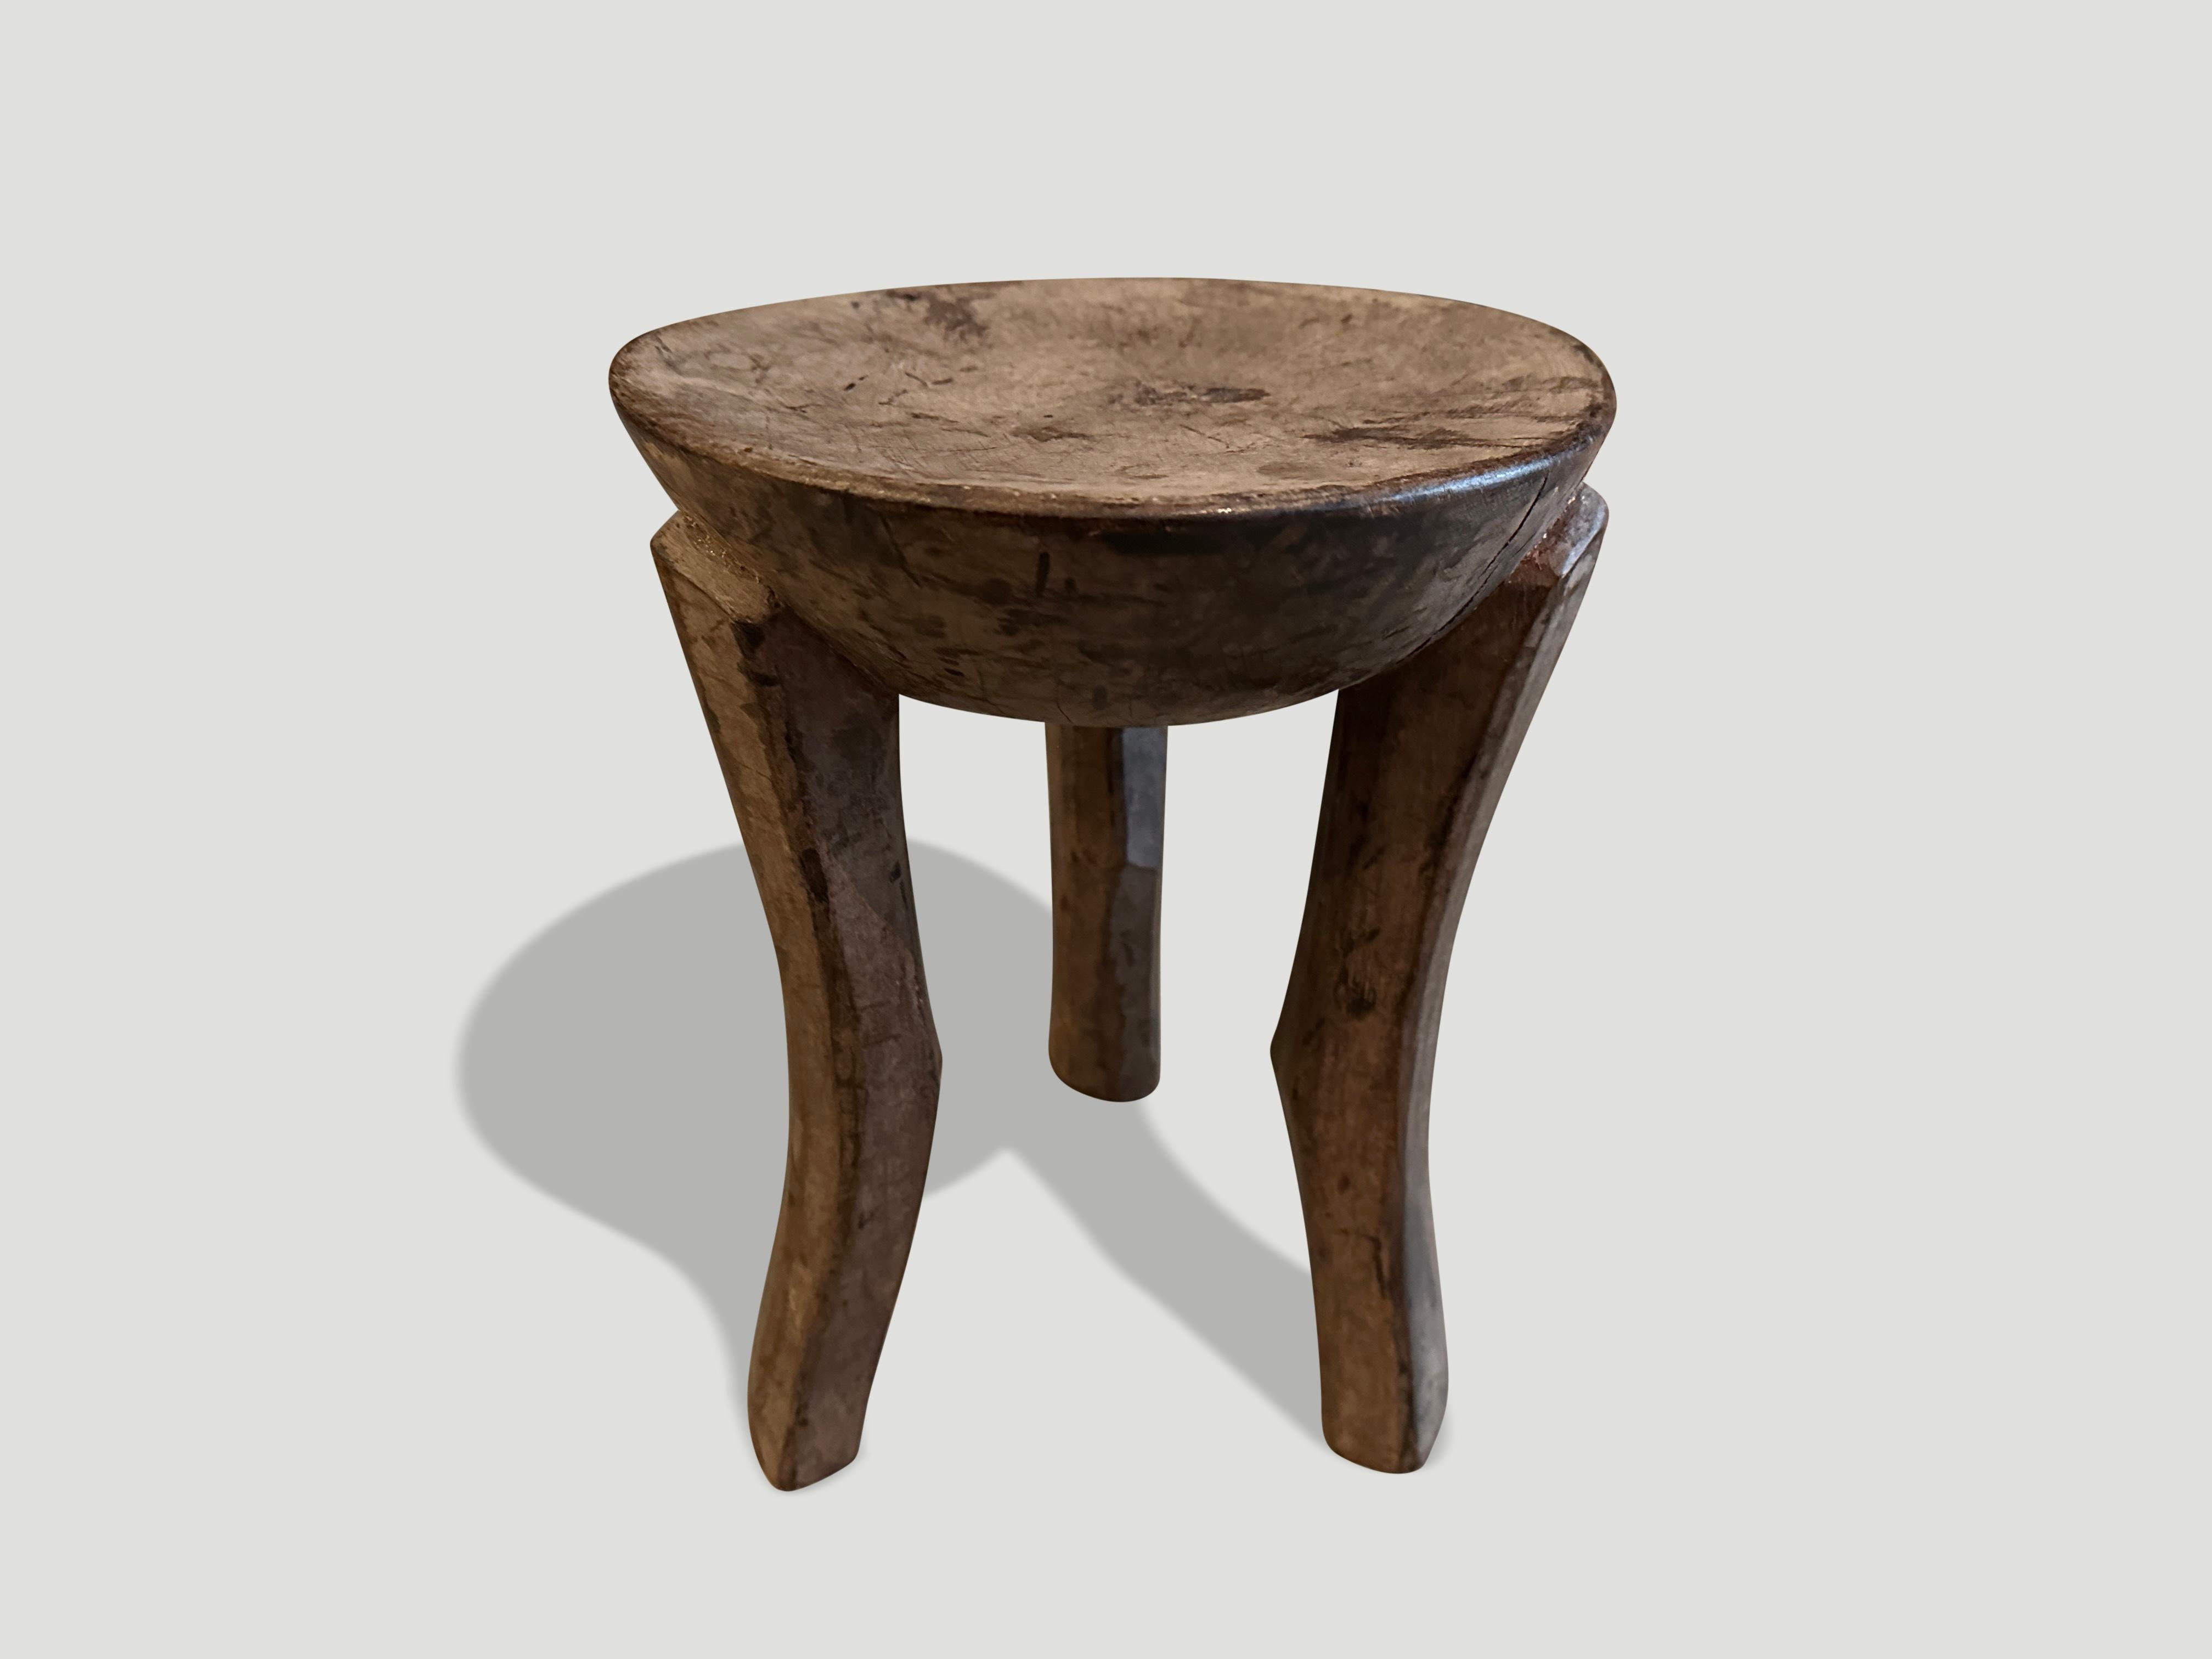 Antique African side table hand carved from a single block of wood. 

This side table was sourced in the spirit of Wabi-Sabi, a Japanese philosophy that beauty can be found in imperfection and impermanence. It is a beauty of things modest and